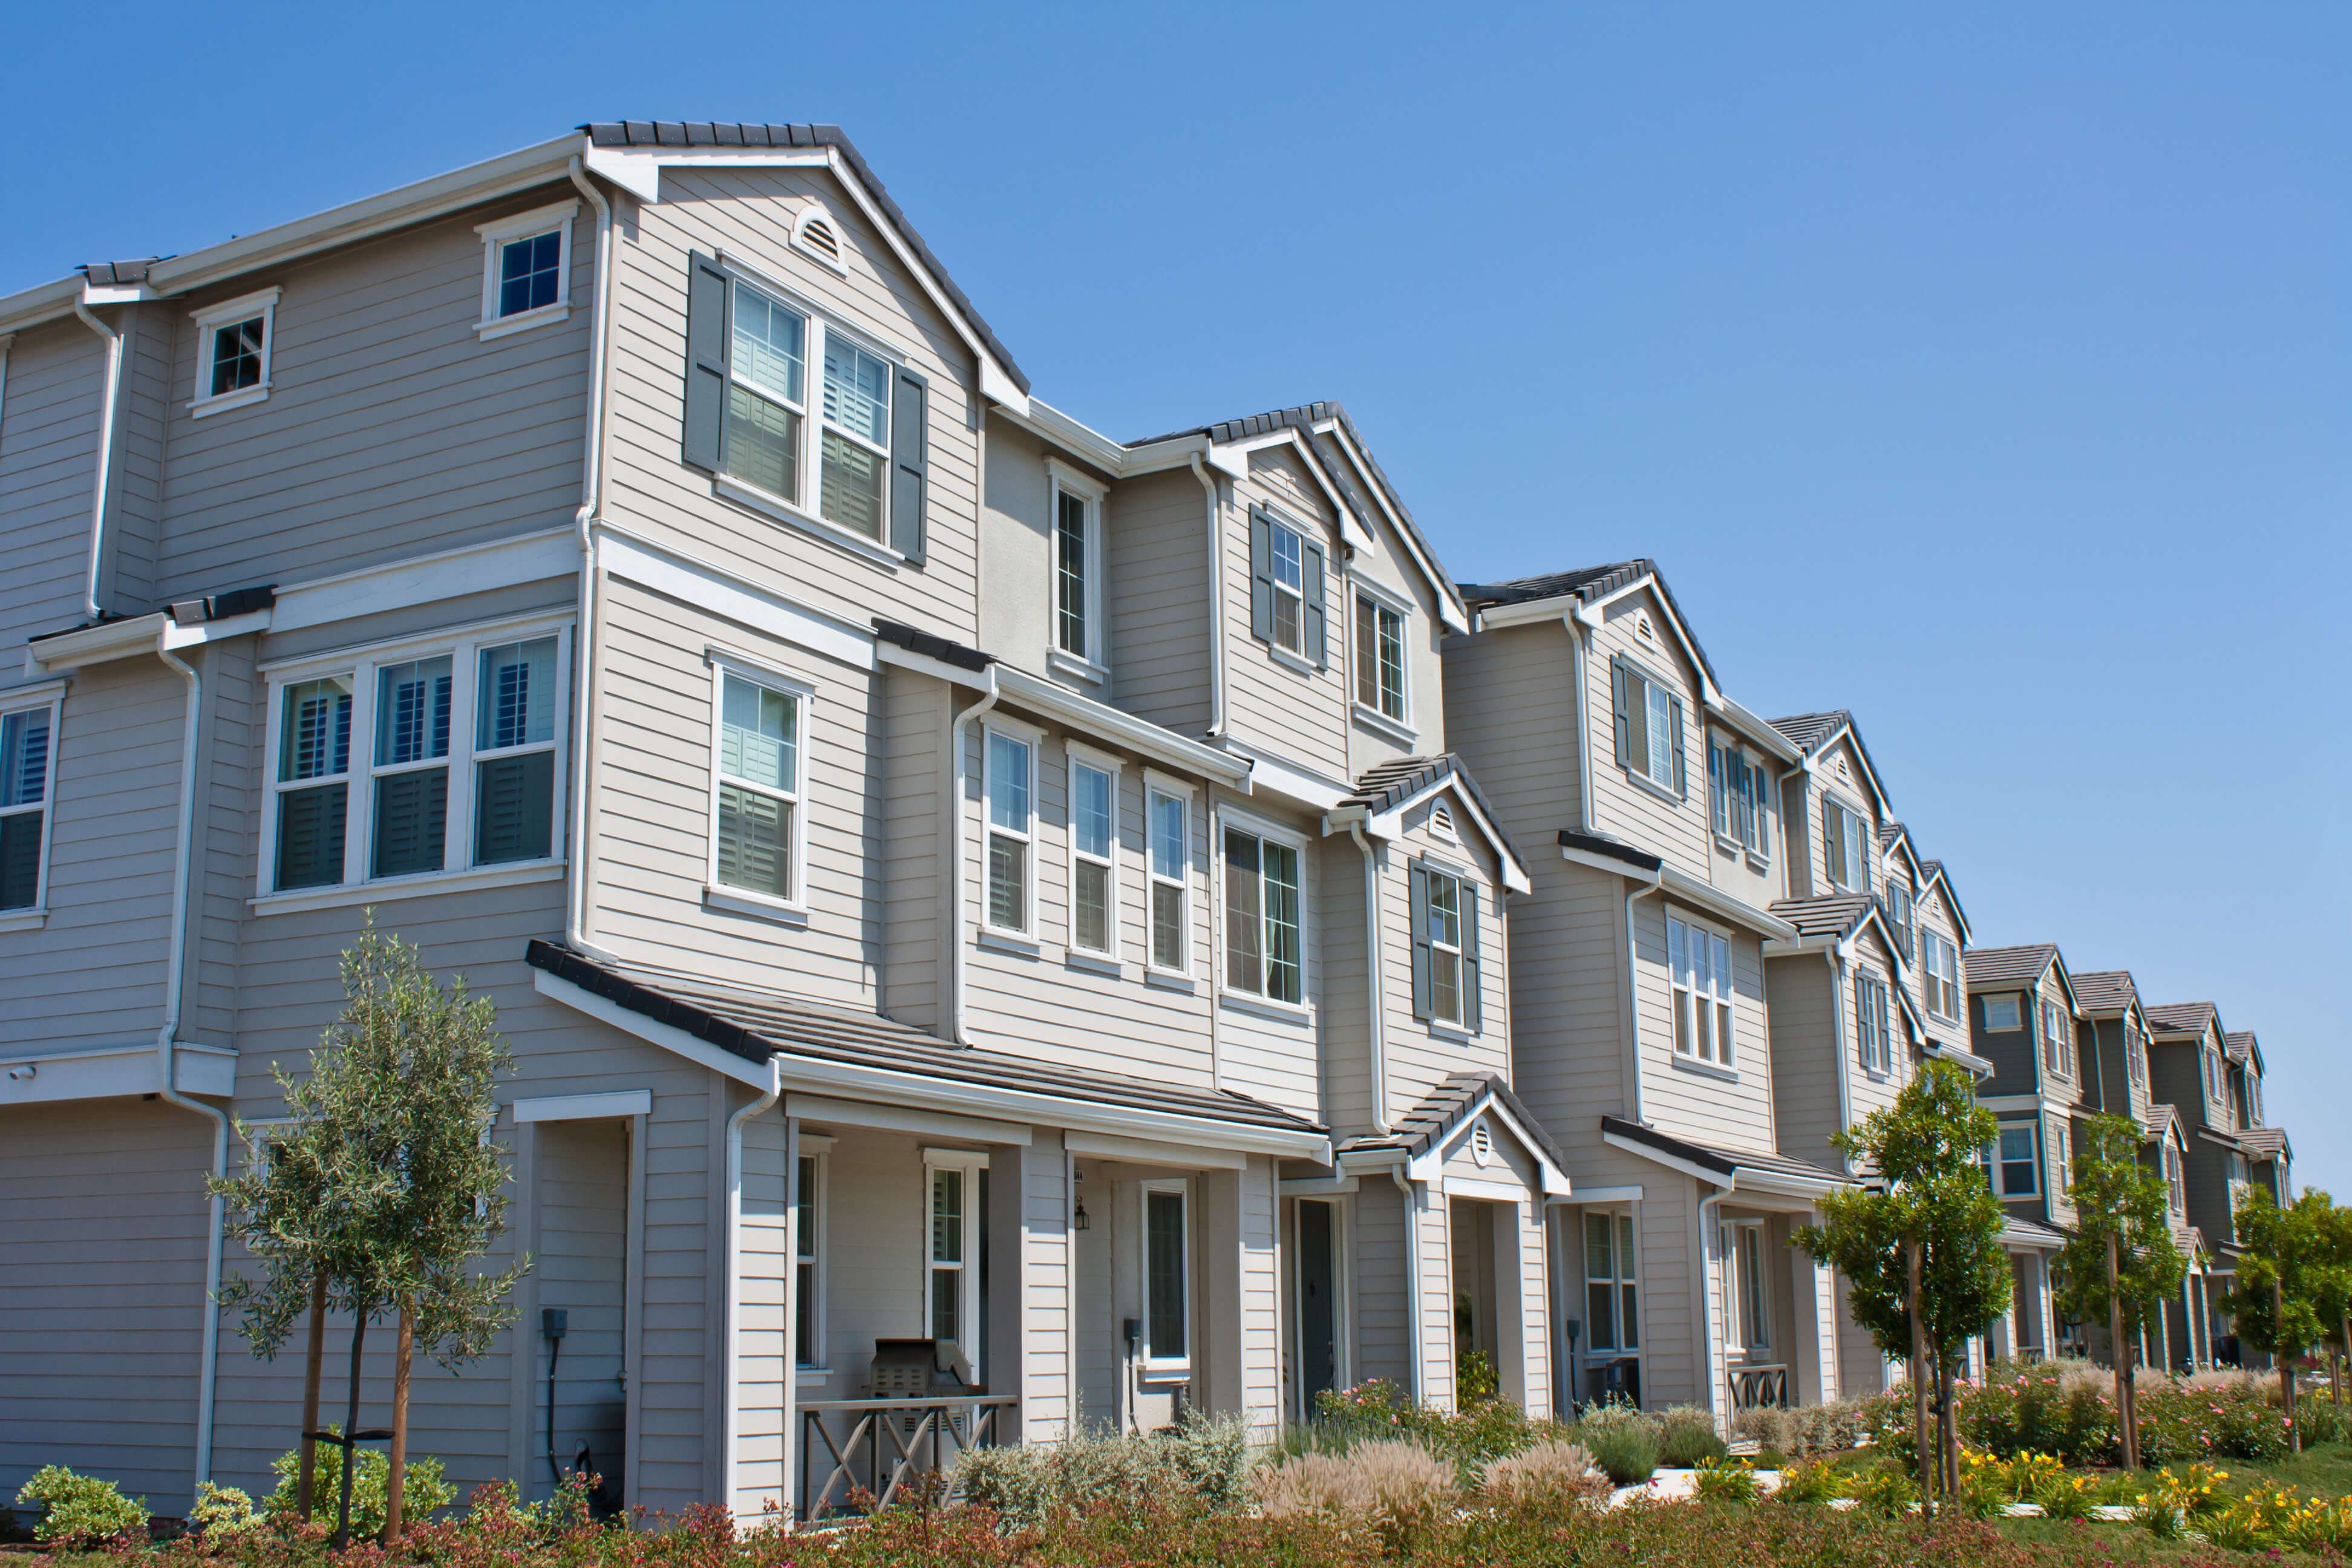 Real estate investment opportunities in multifamily properties